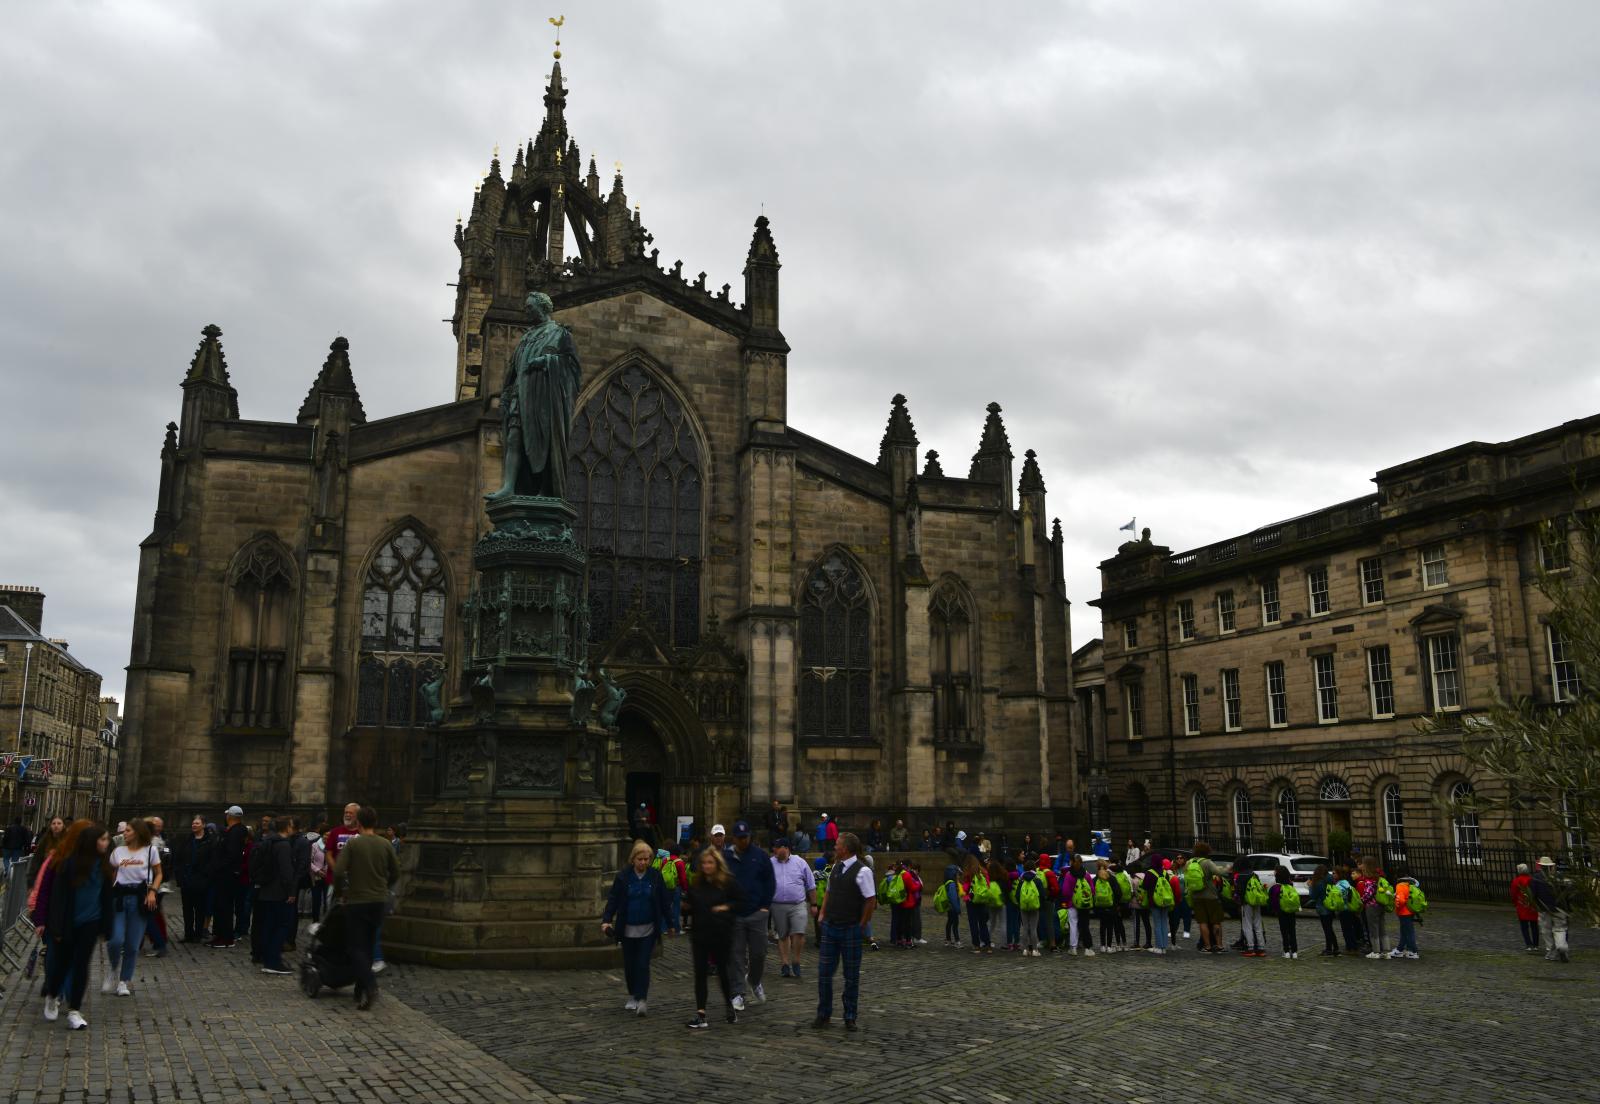 Image from Daily Life UK - Cathedral in Edinburgh